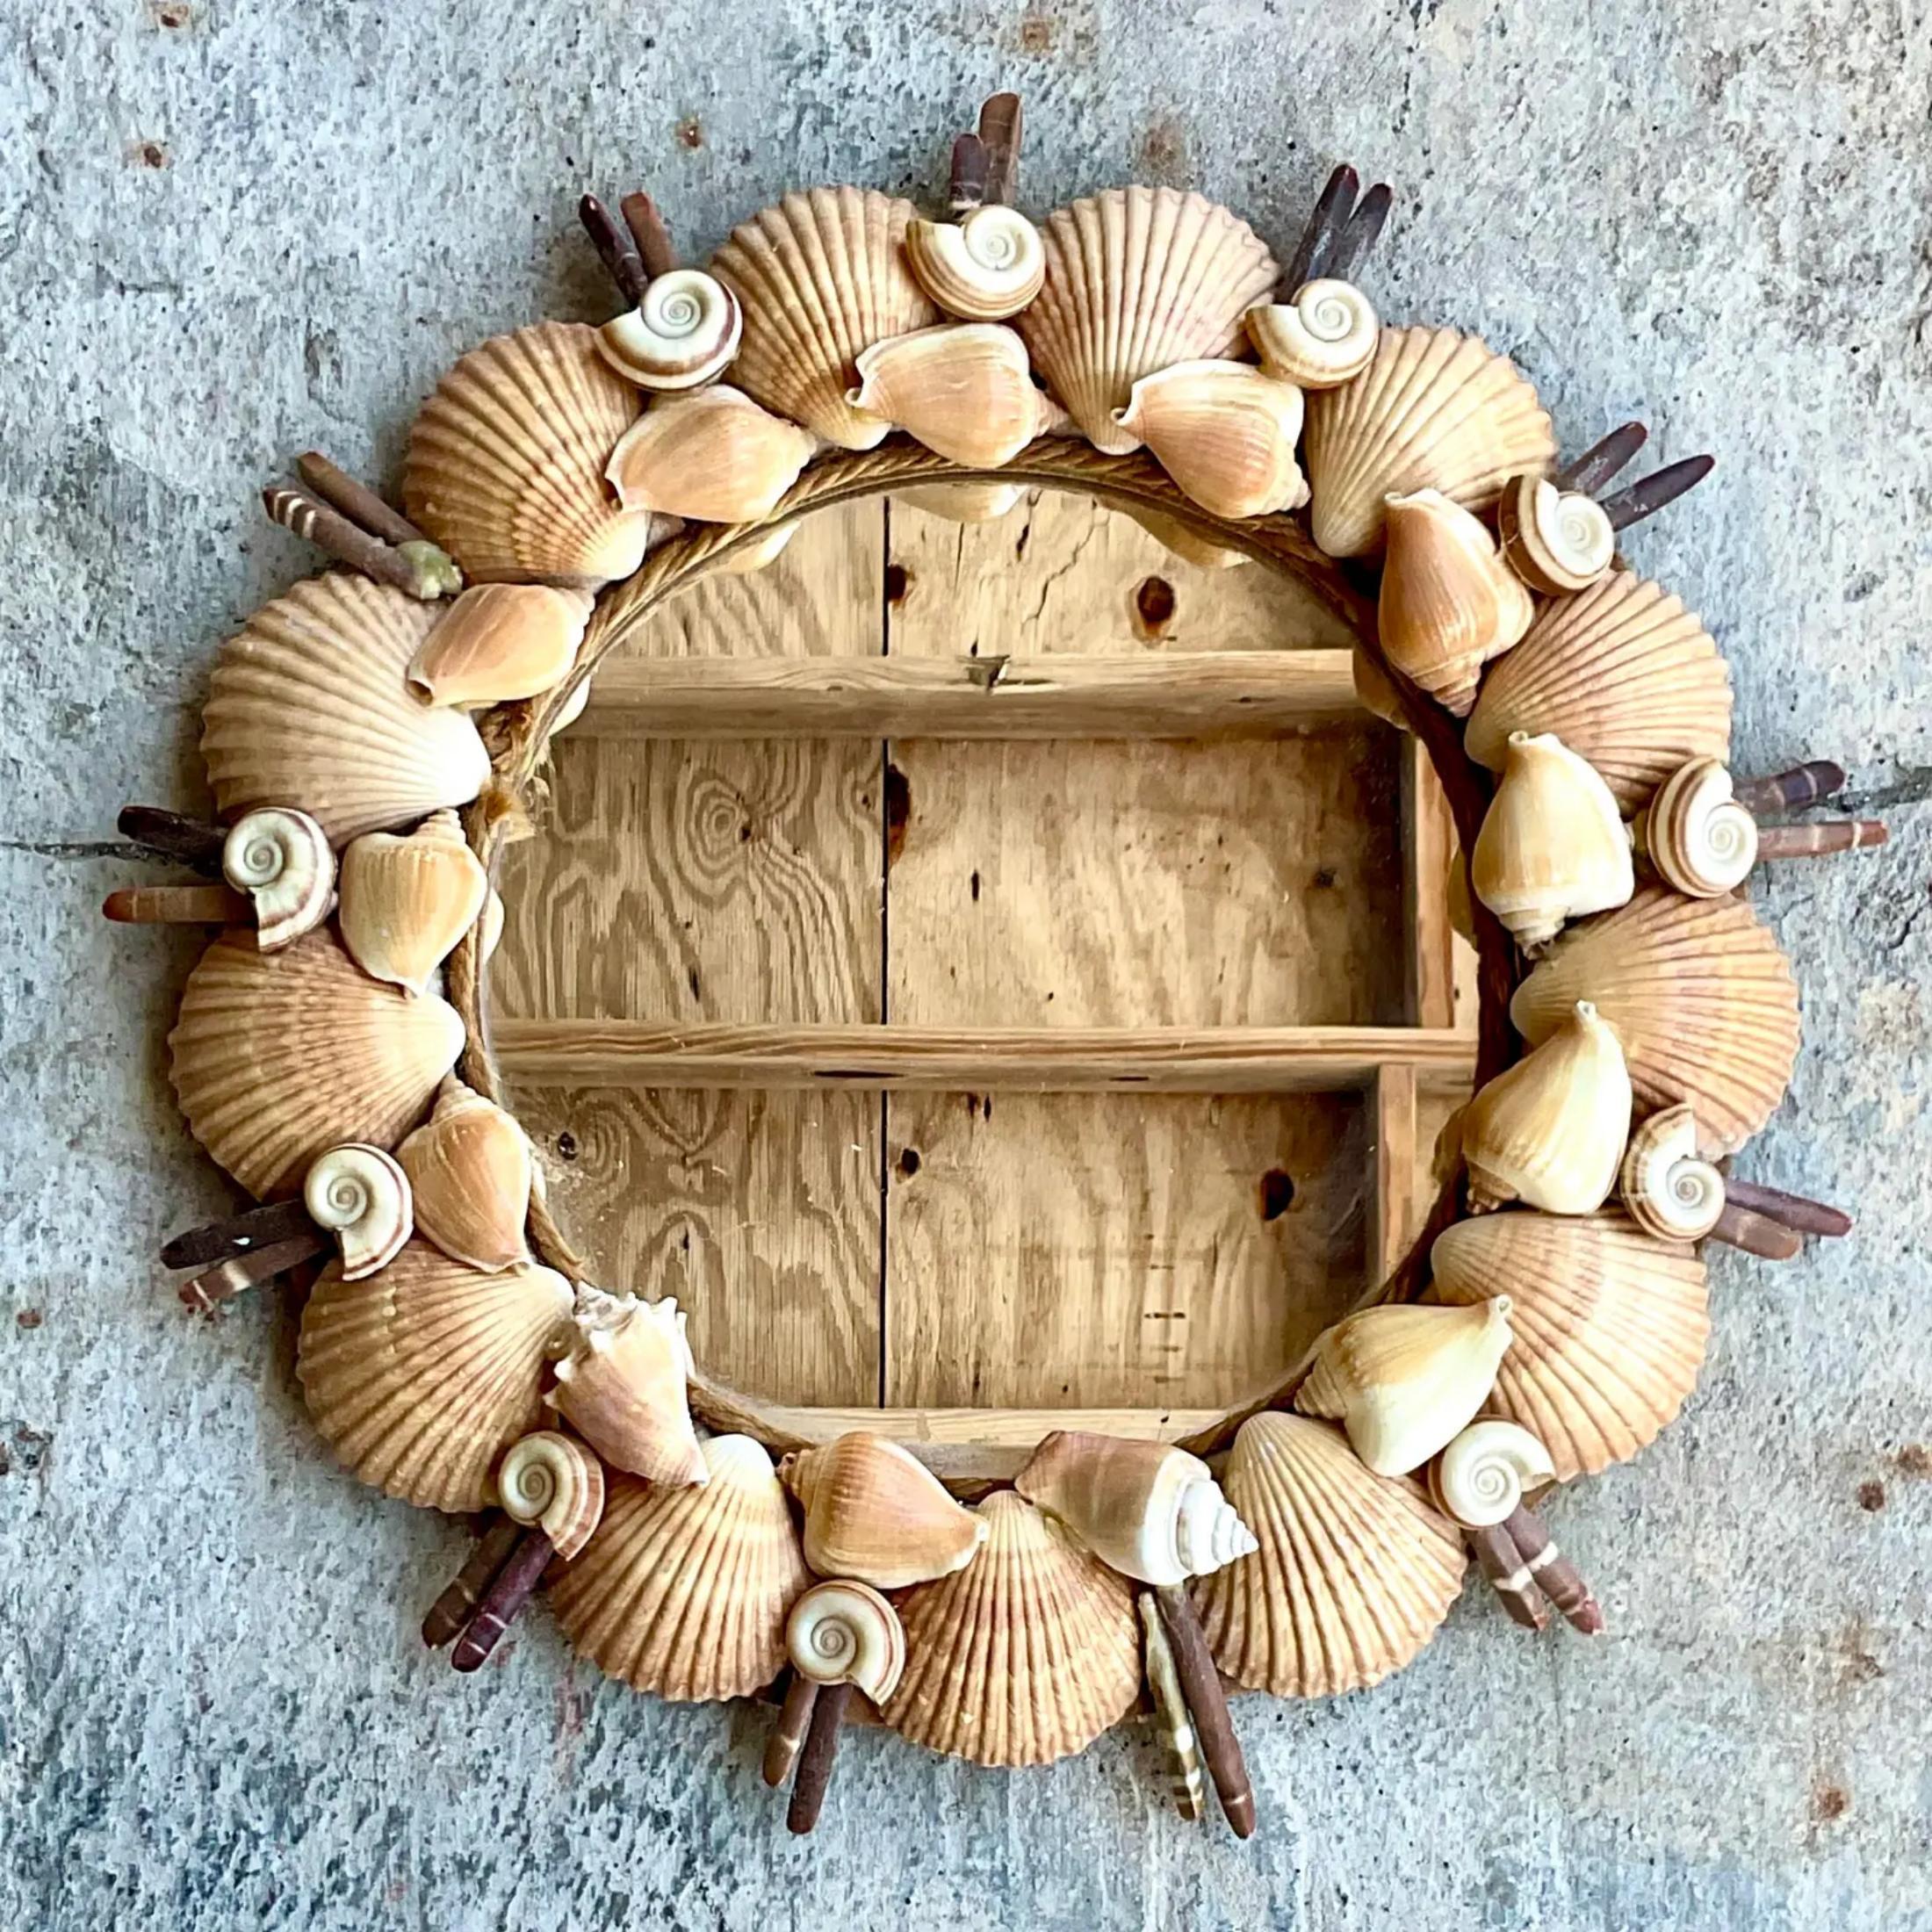 Fabulous vintage Coastal shell mirror. Beautiful hand made ring of shells in warm browns and neutrals. Acquired from a Palm Beach estate